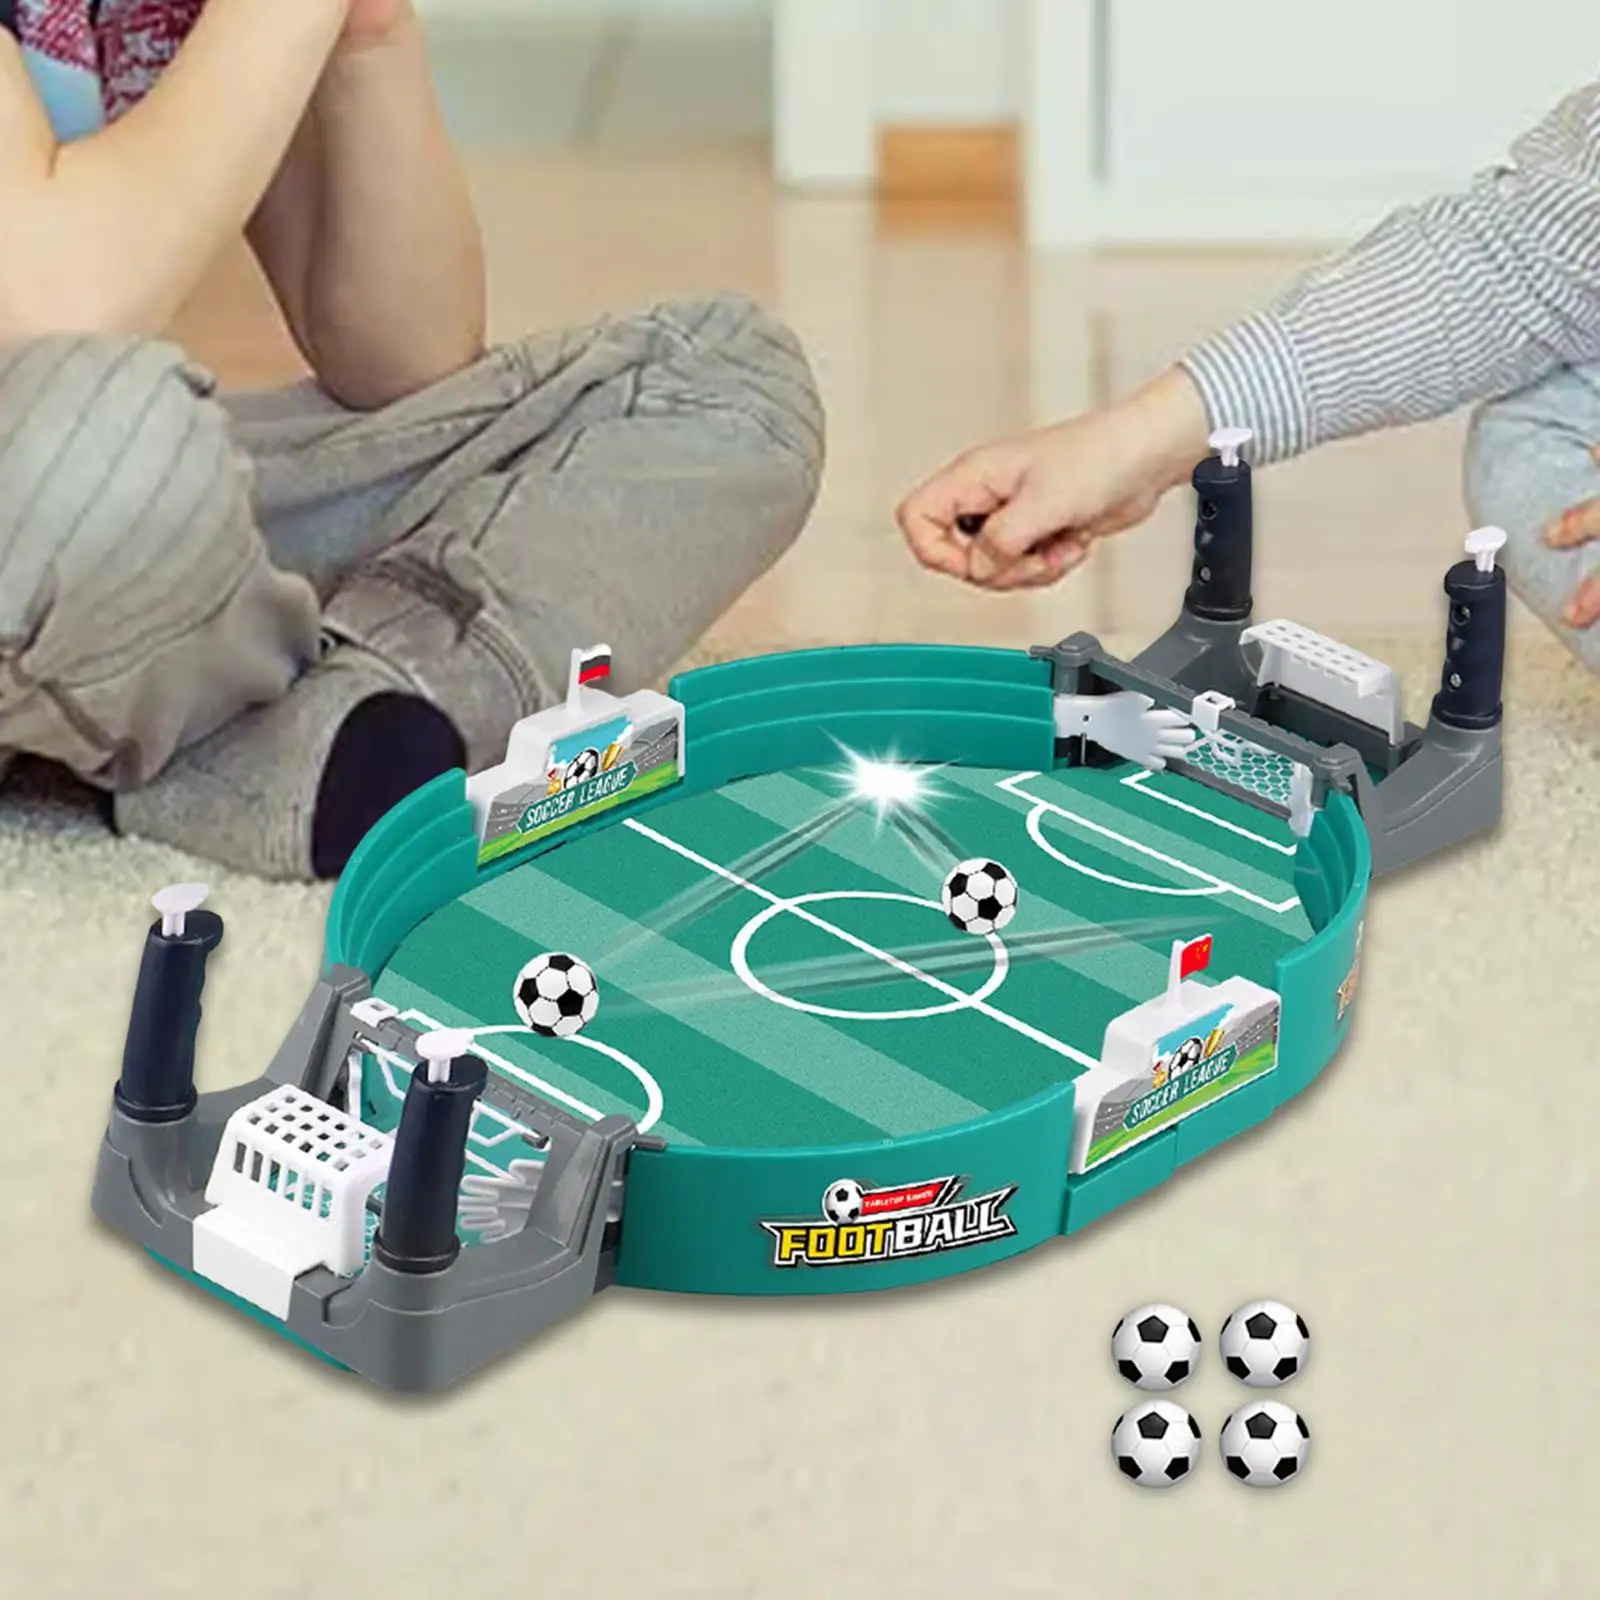 Tabletop Football Pinball Games Arcade Style Indoor Sport with Finger Battle